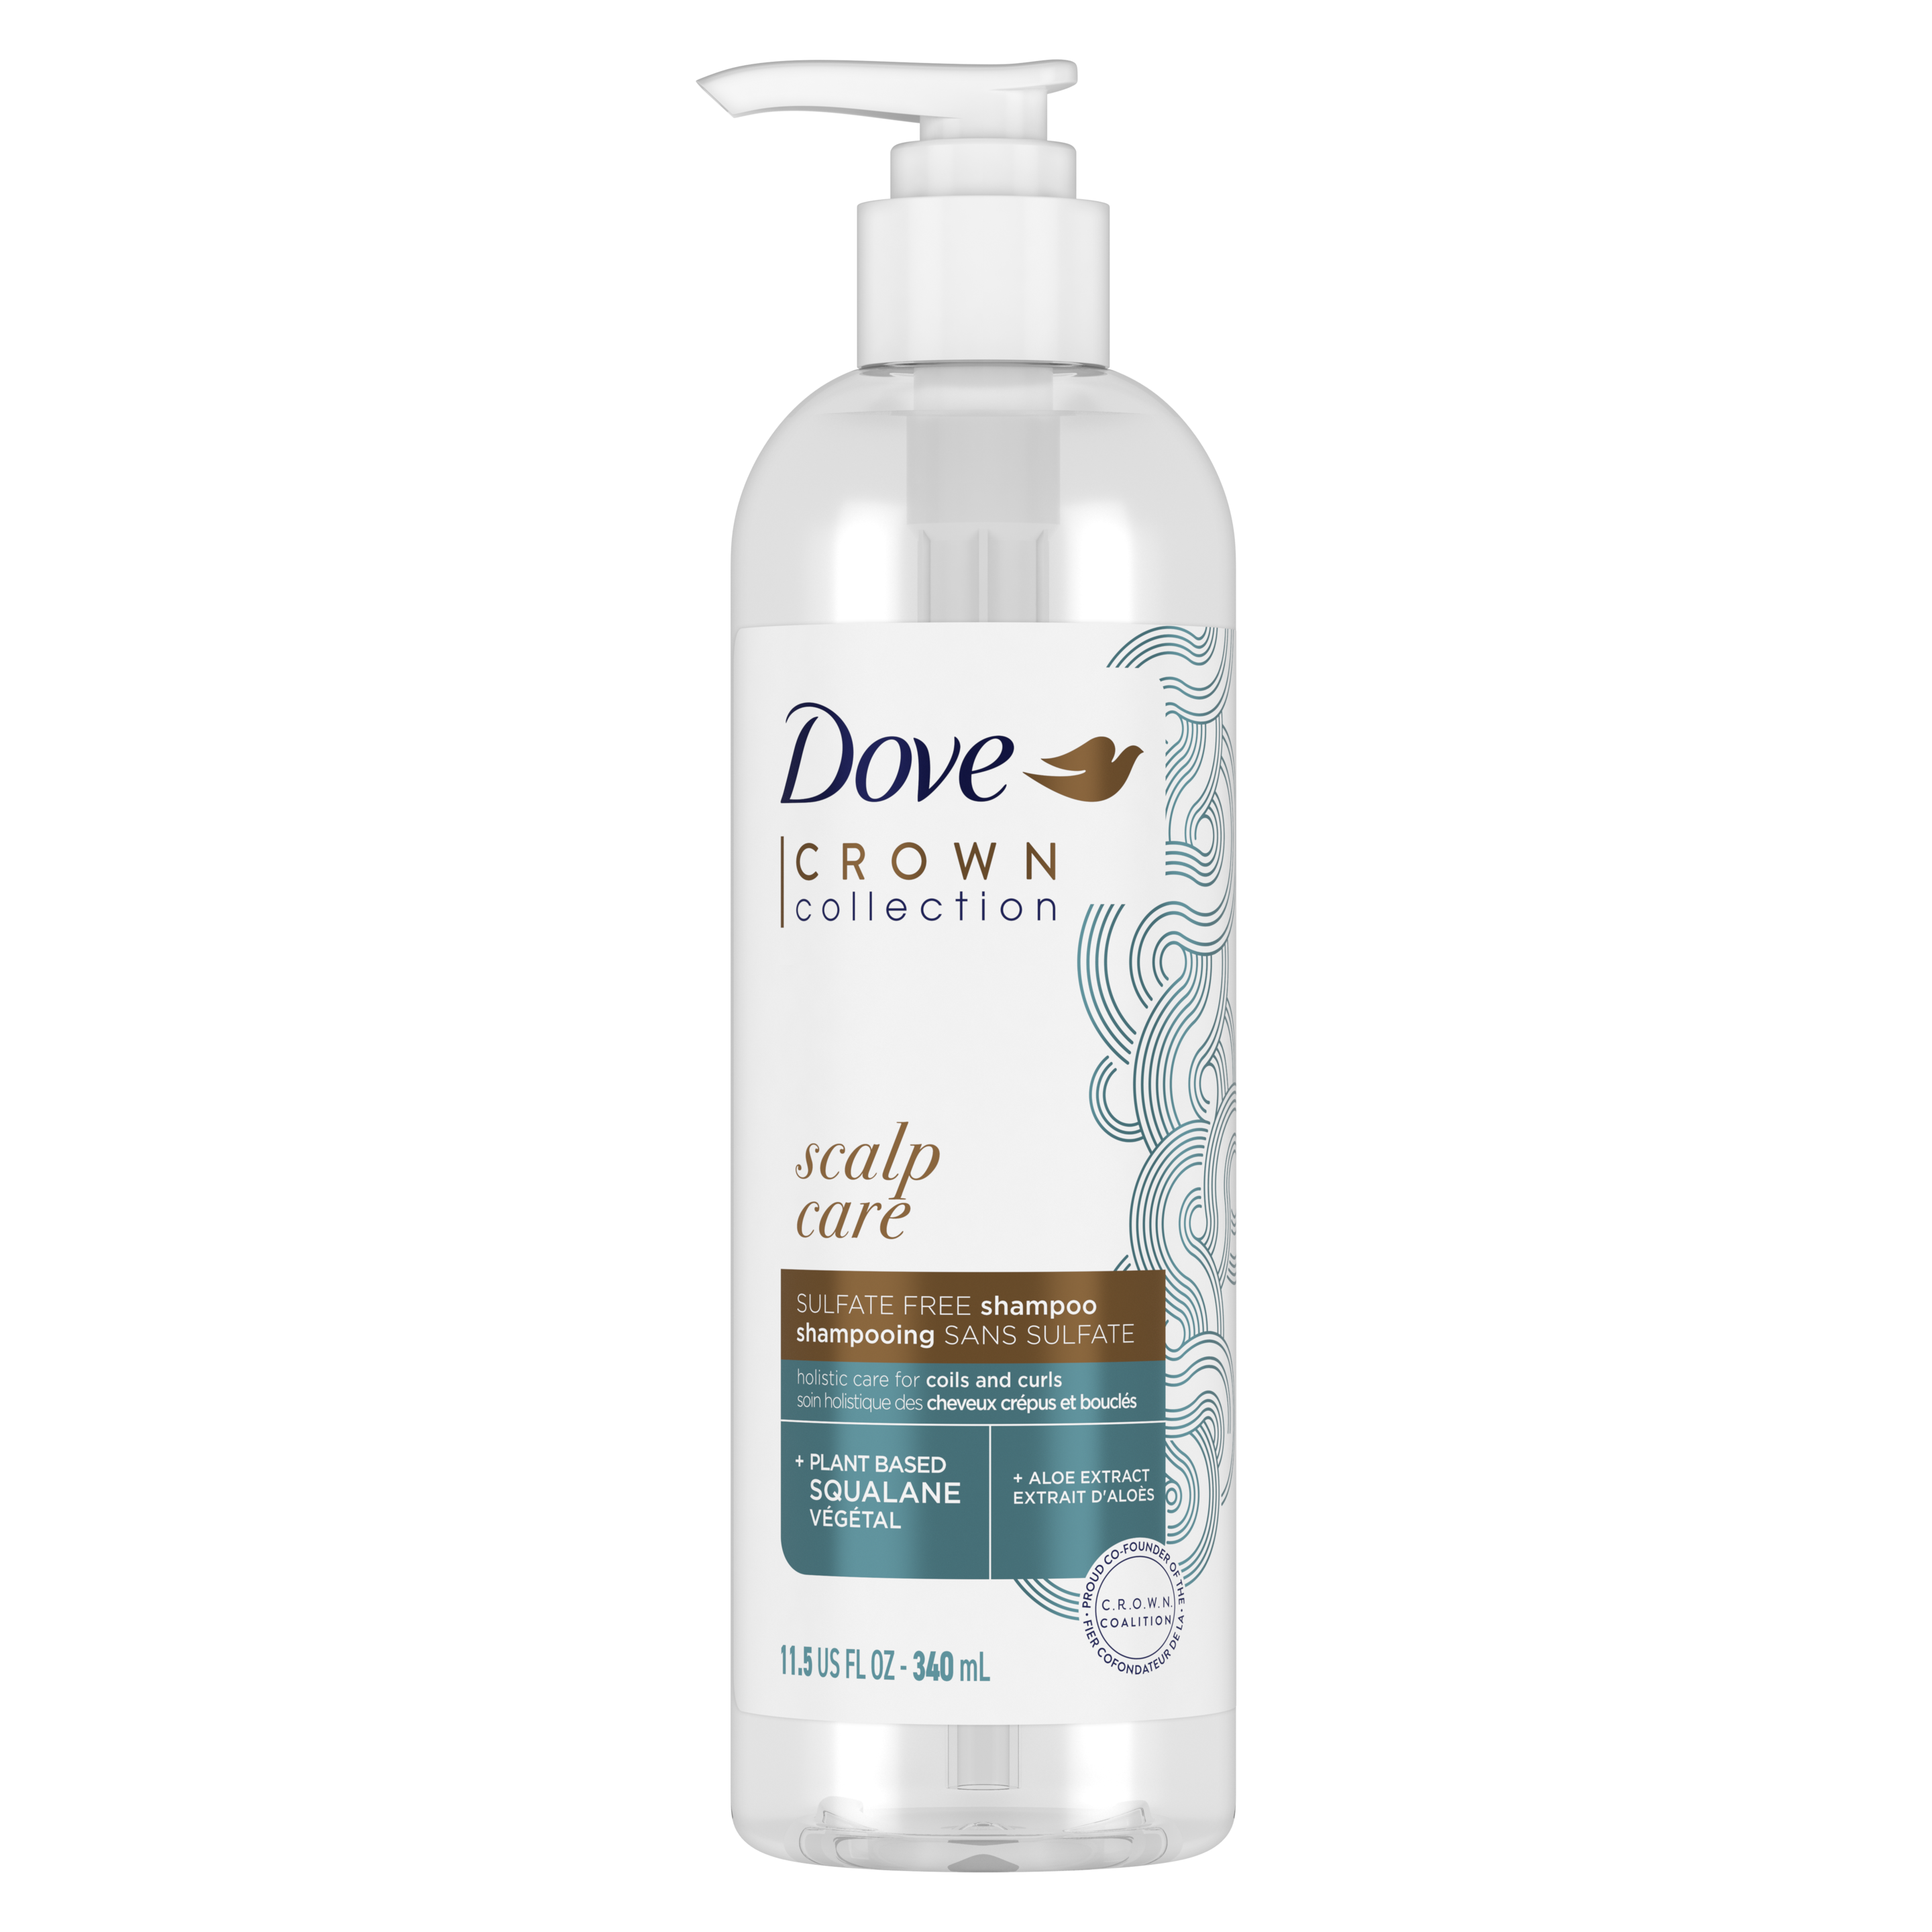 Dove Crown Collection Scalp Care Shampoo